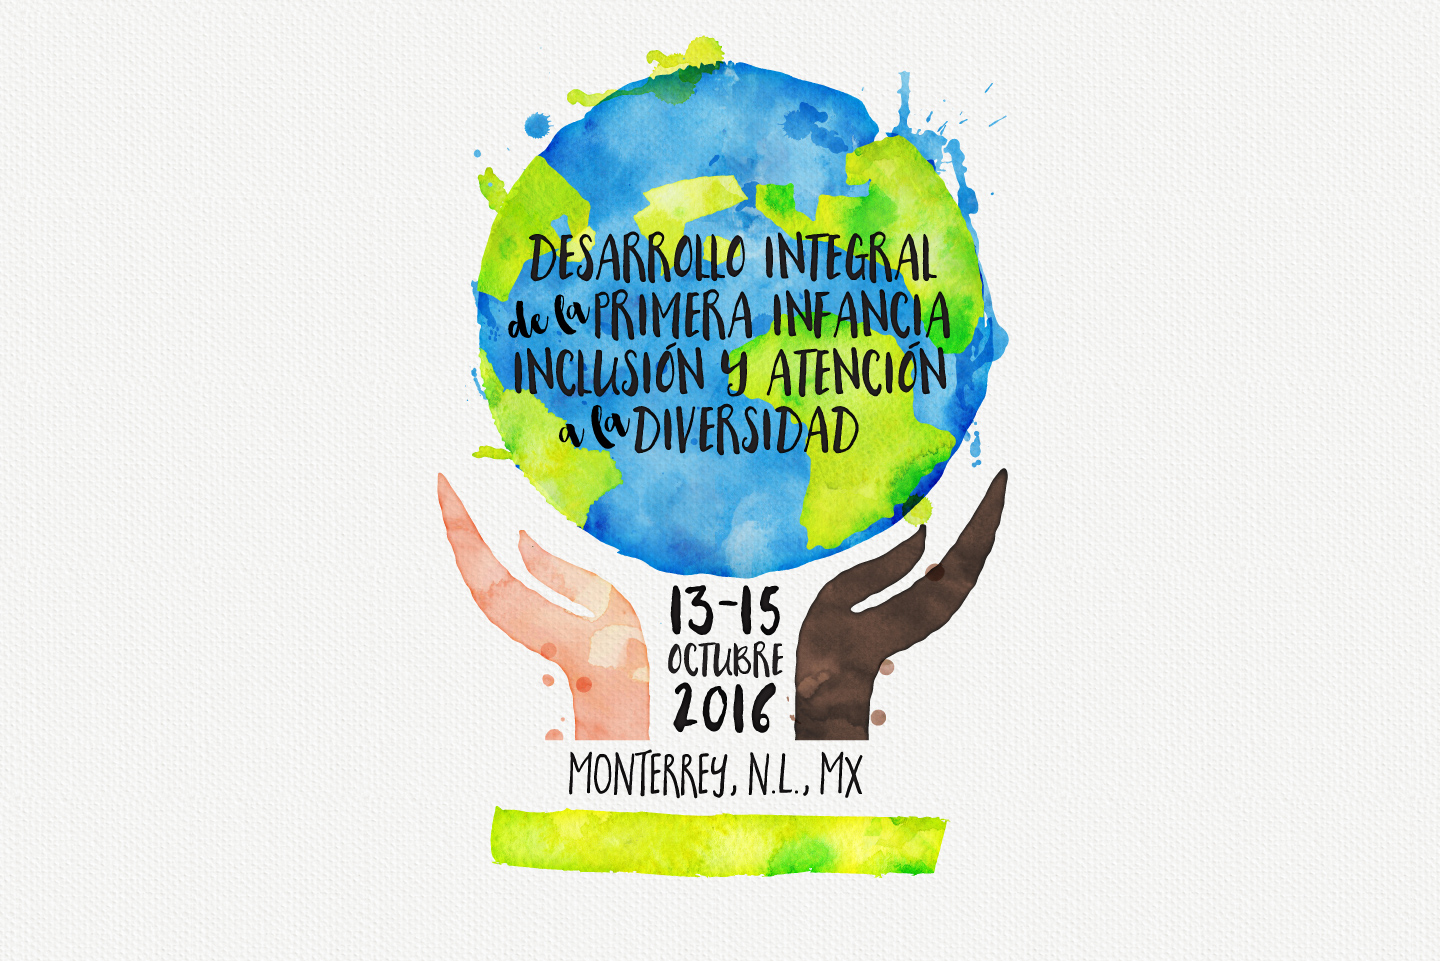 Poster for a conference on early childhood education in Mexico